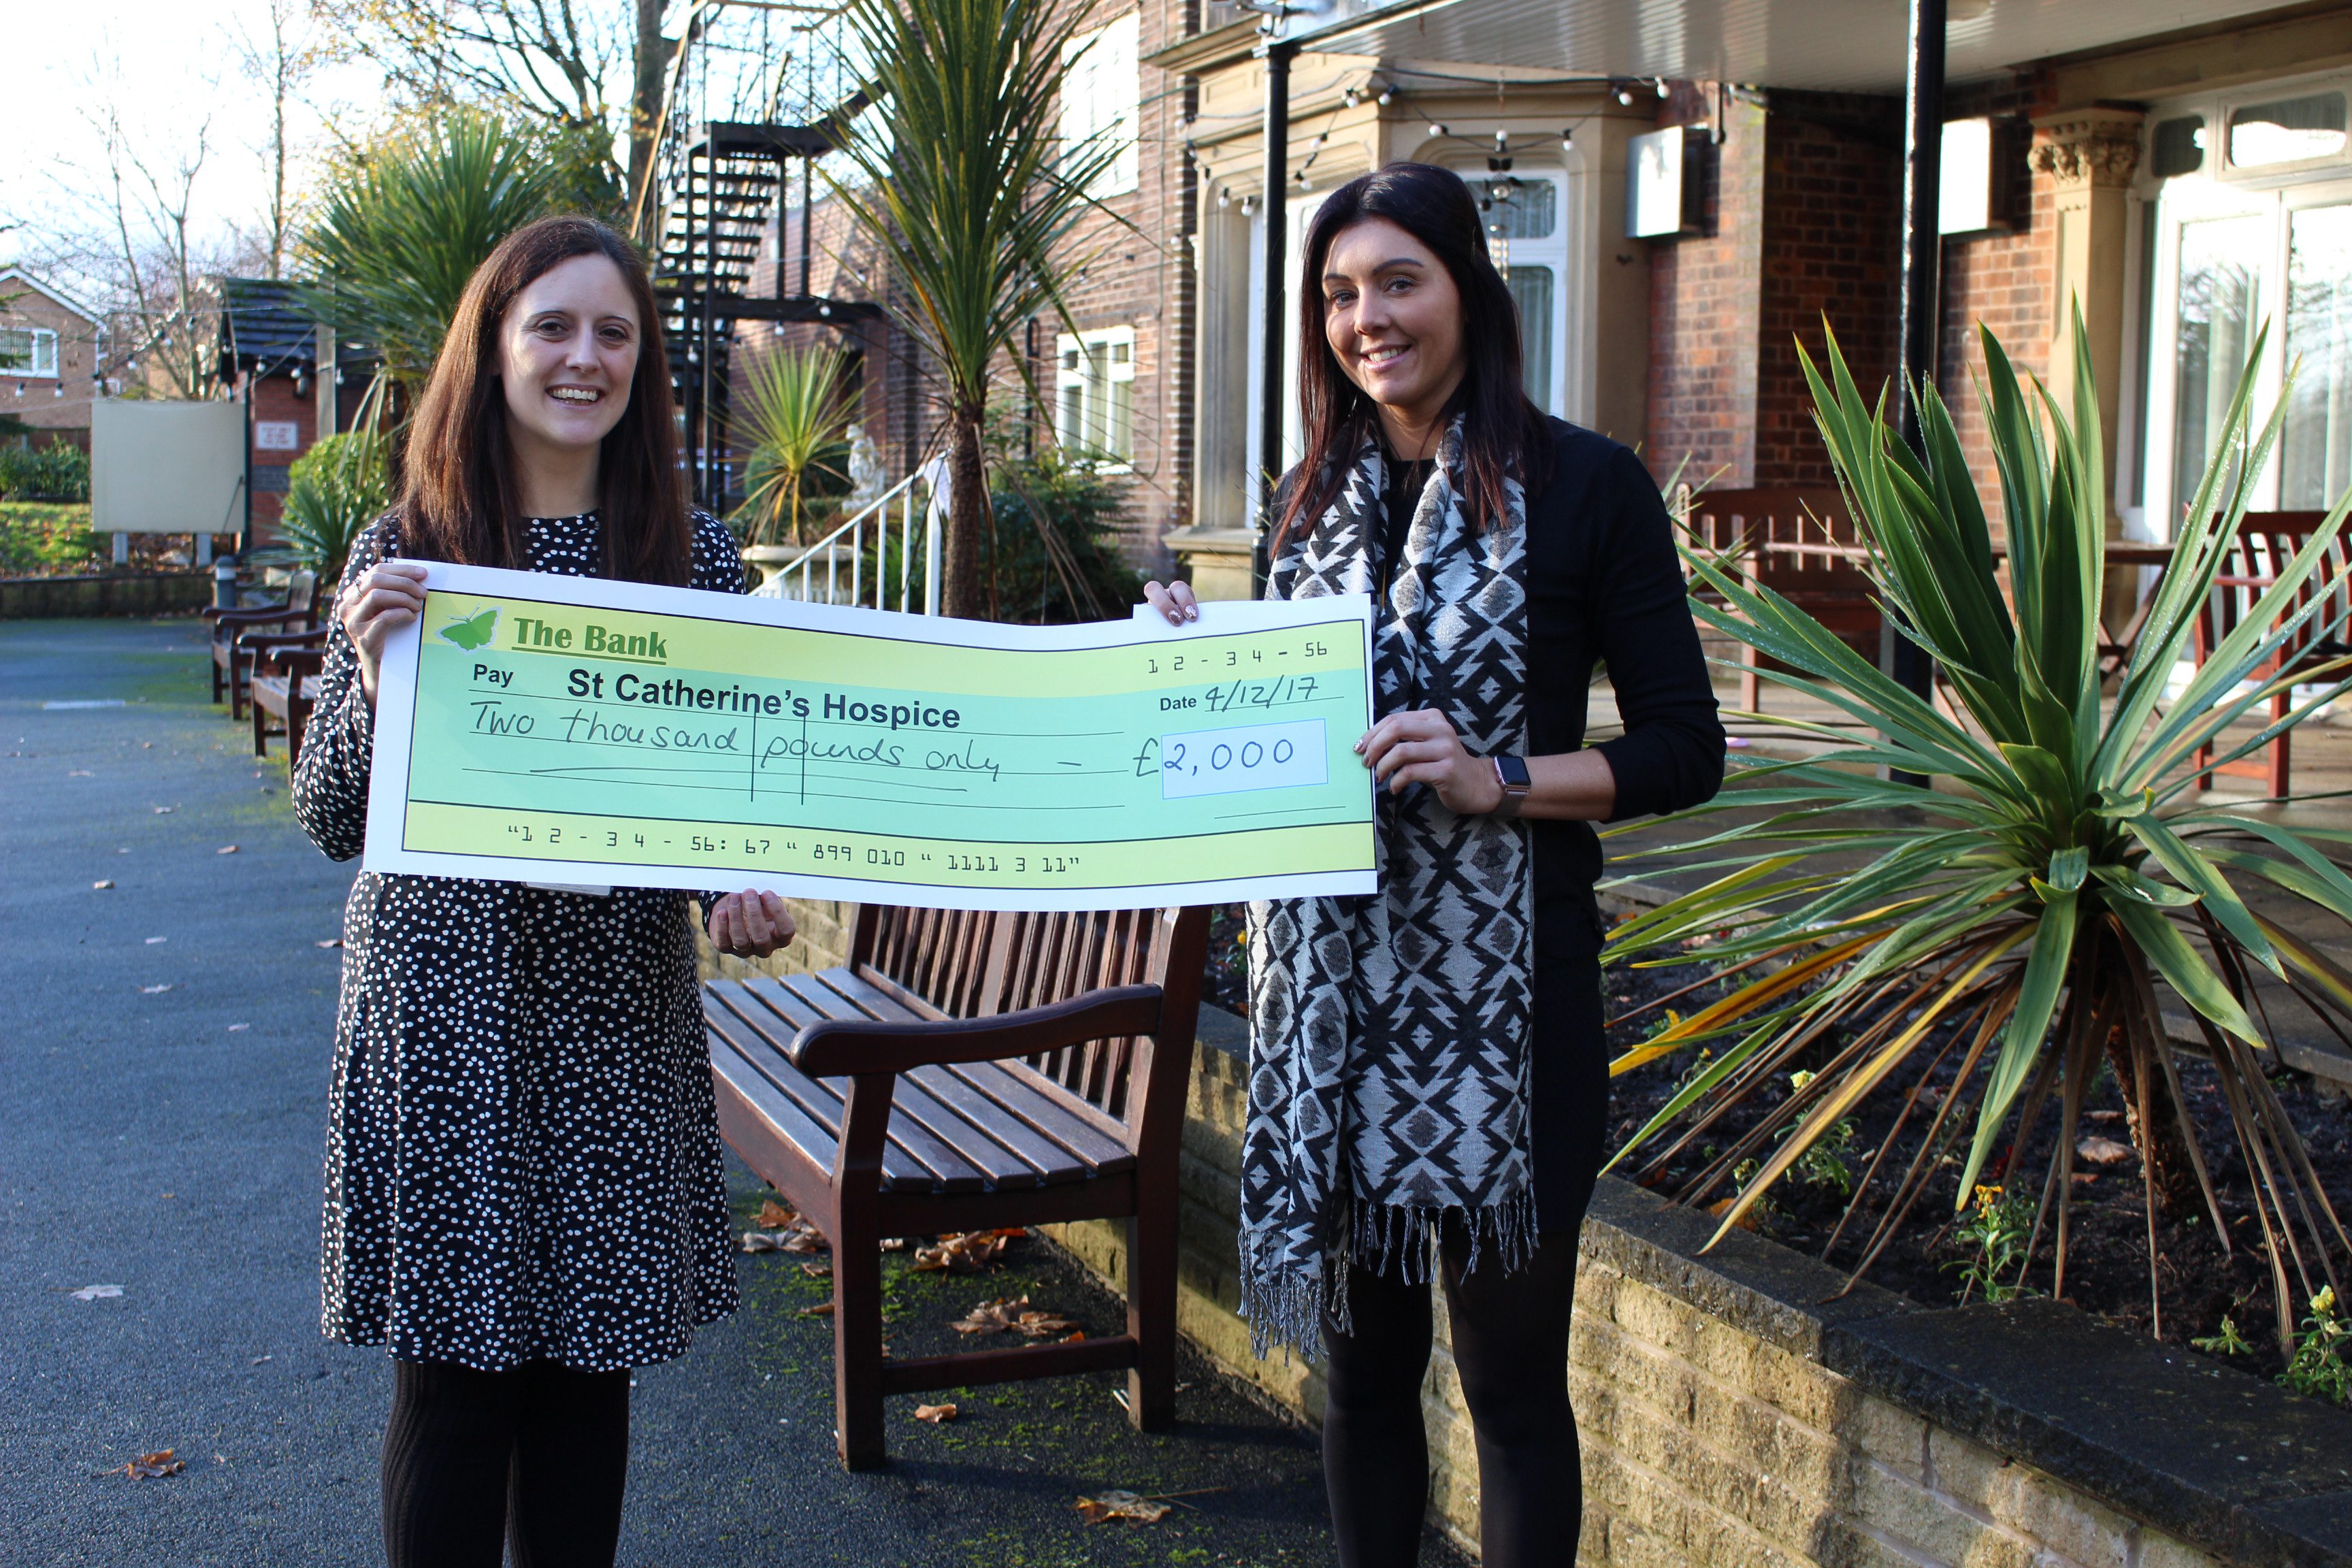 Festive Fun at Utiligroup raises £2,000 for St Catherine’s Hospice